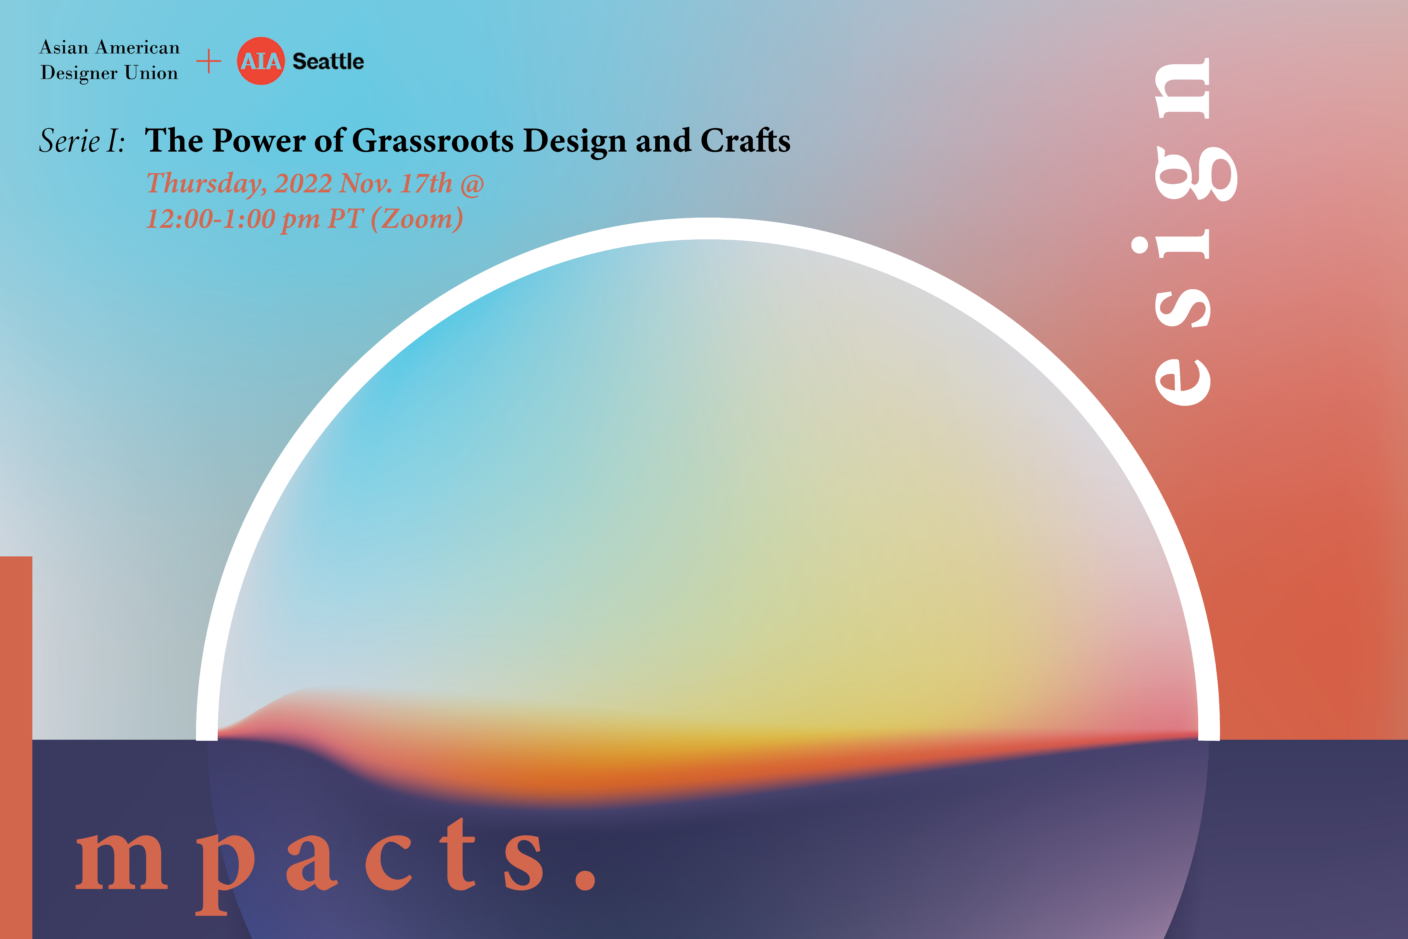 The first session of a two-Installment forum series sharing stories and experience from designers, craftsmen and grassroots community leaders on the social impacts they are making through their hands on work.